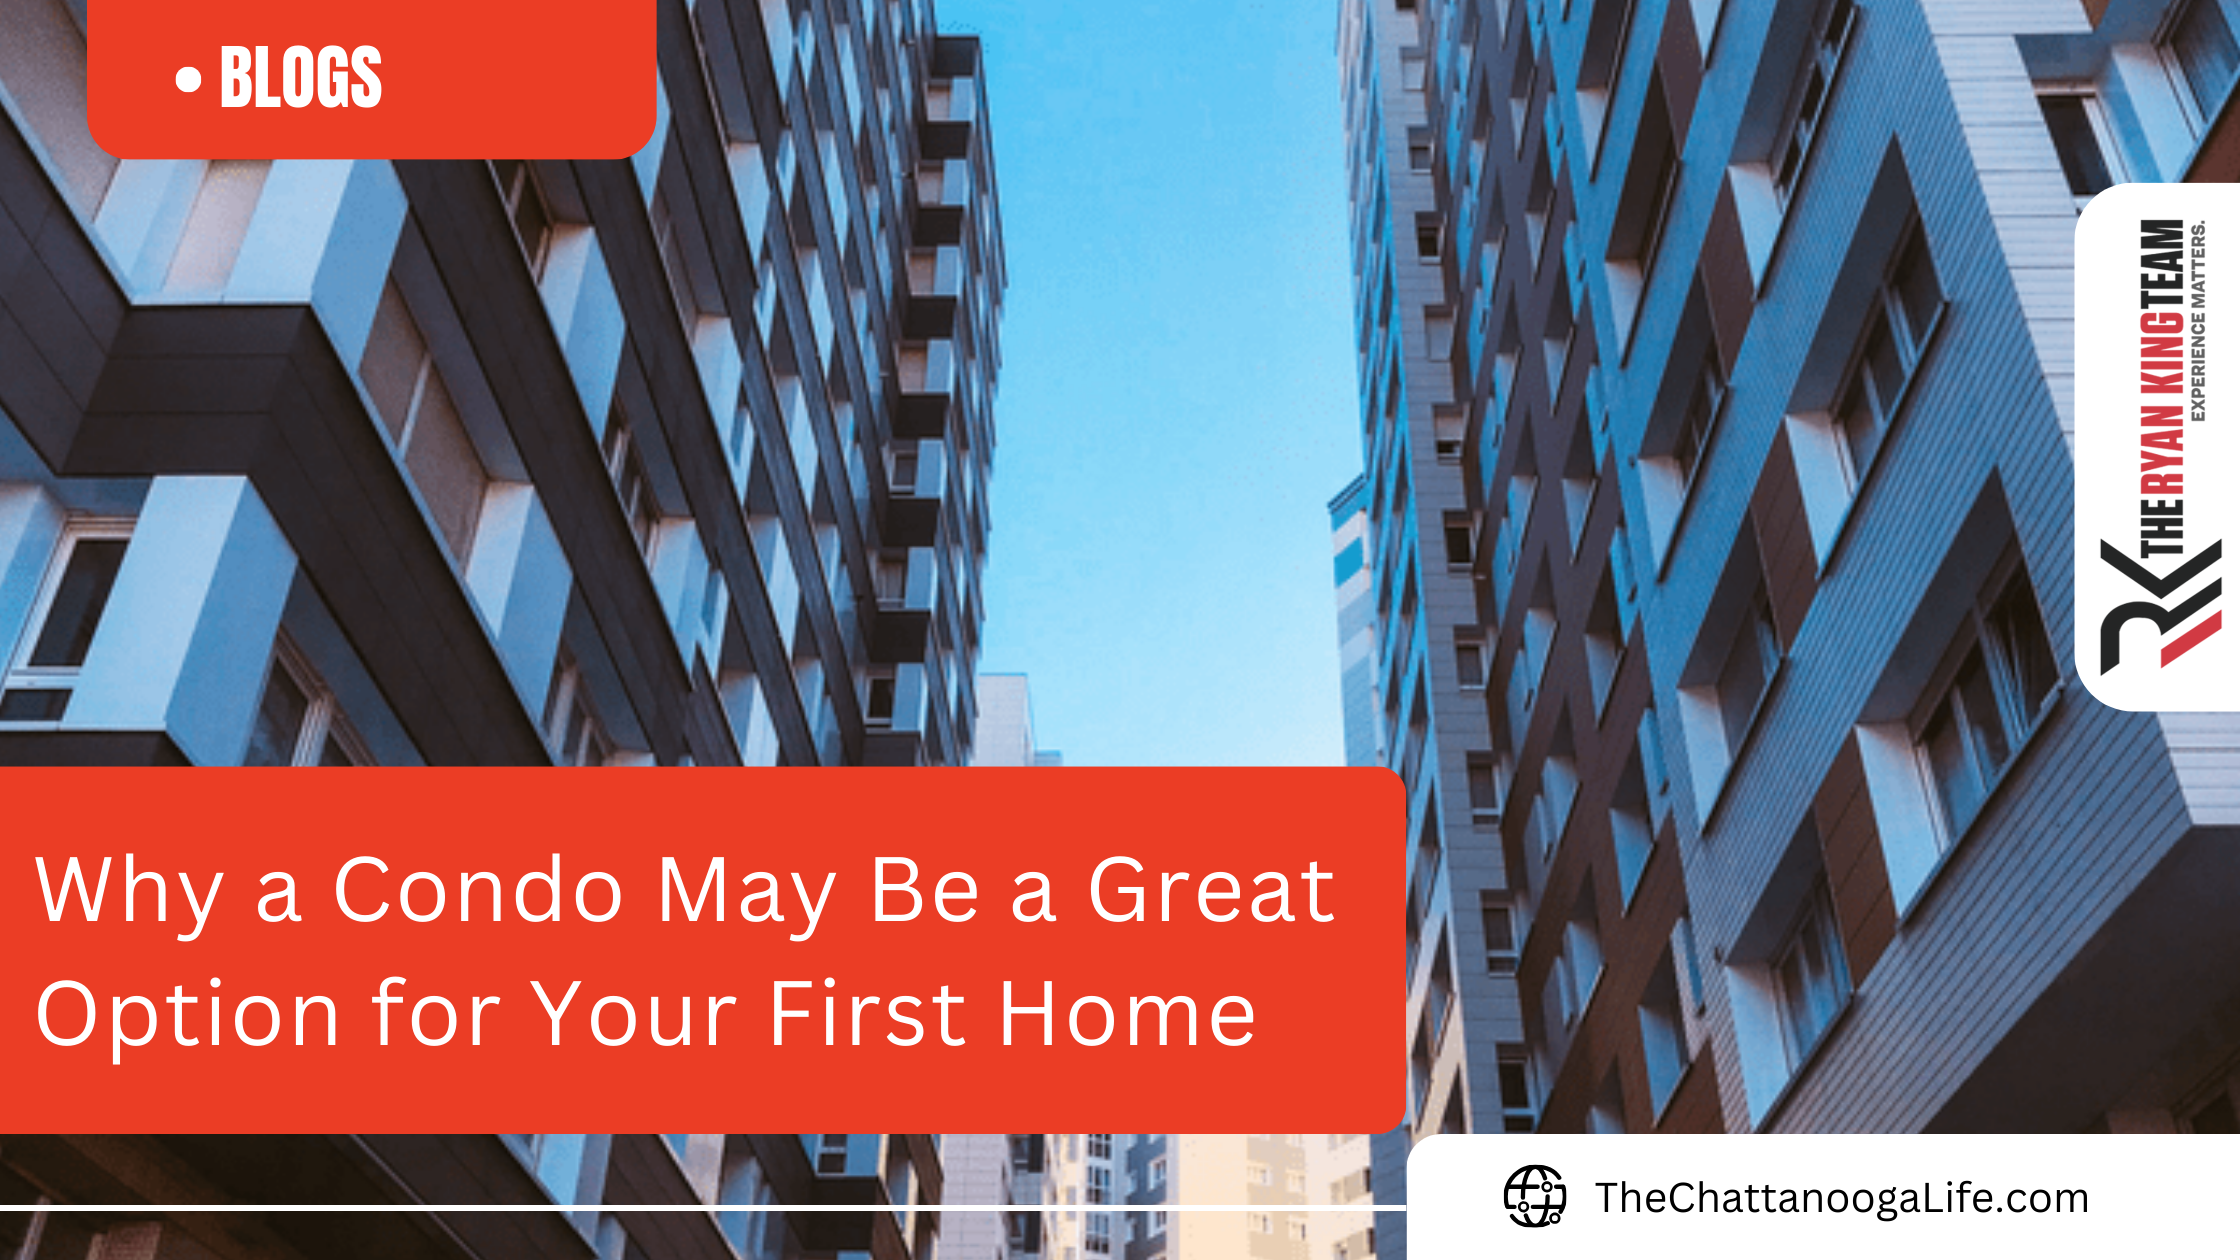 Why a Condo May Be a Great Option for Your First Home